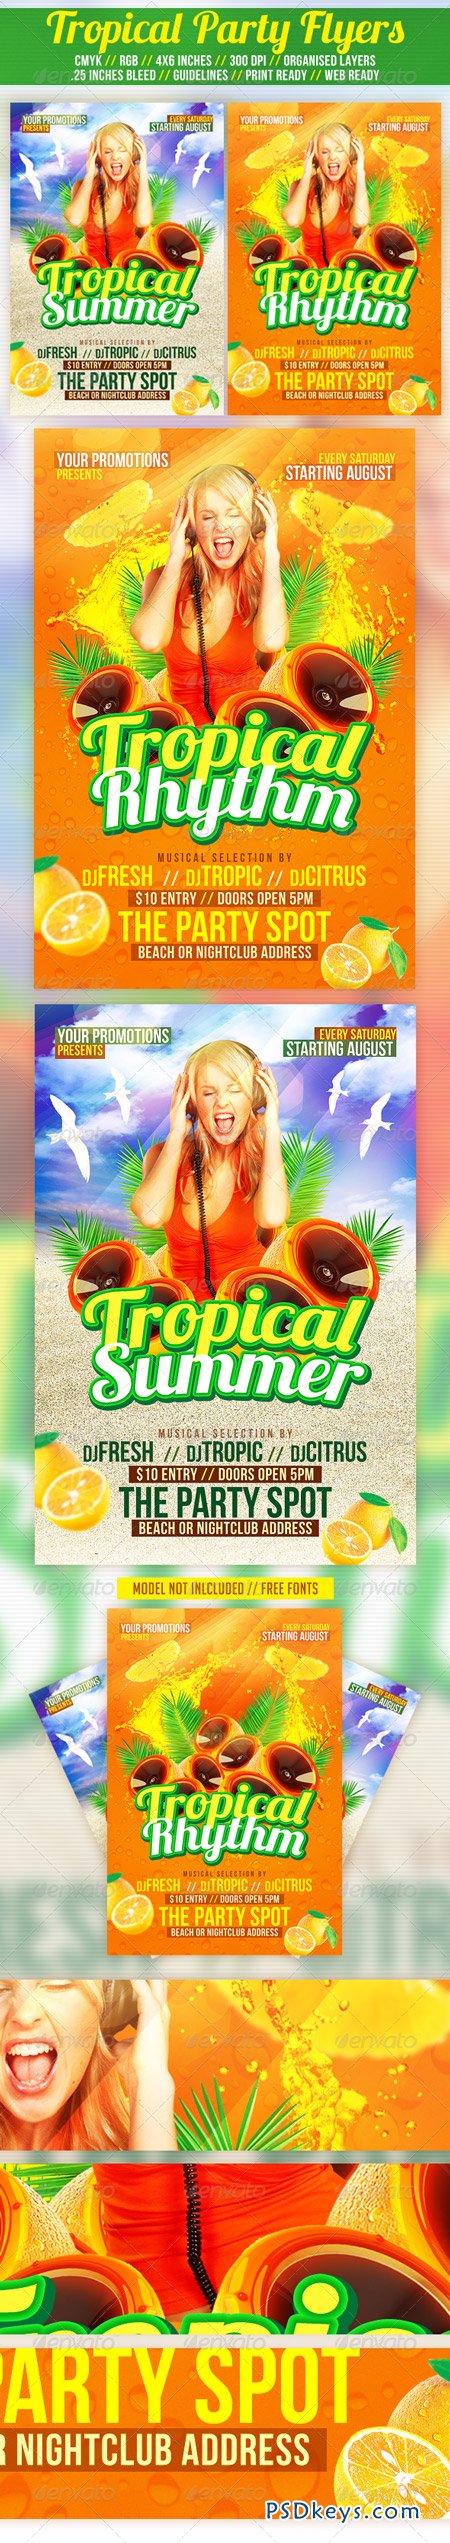 Tropical Party Flyers 2645156